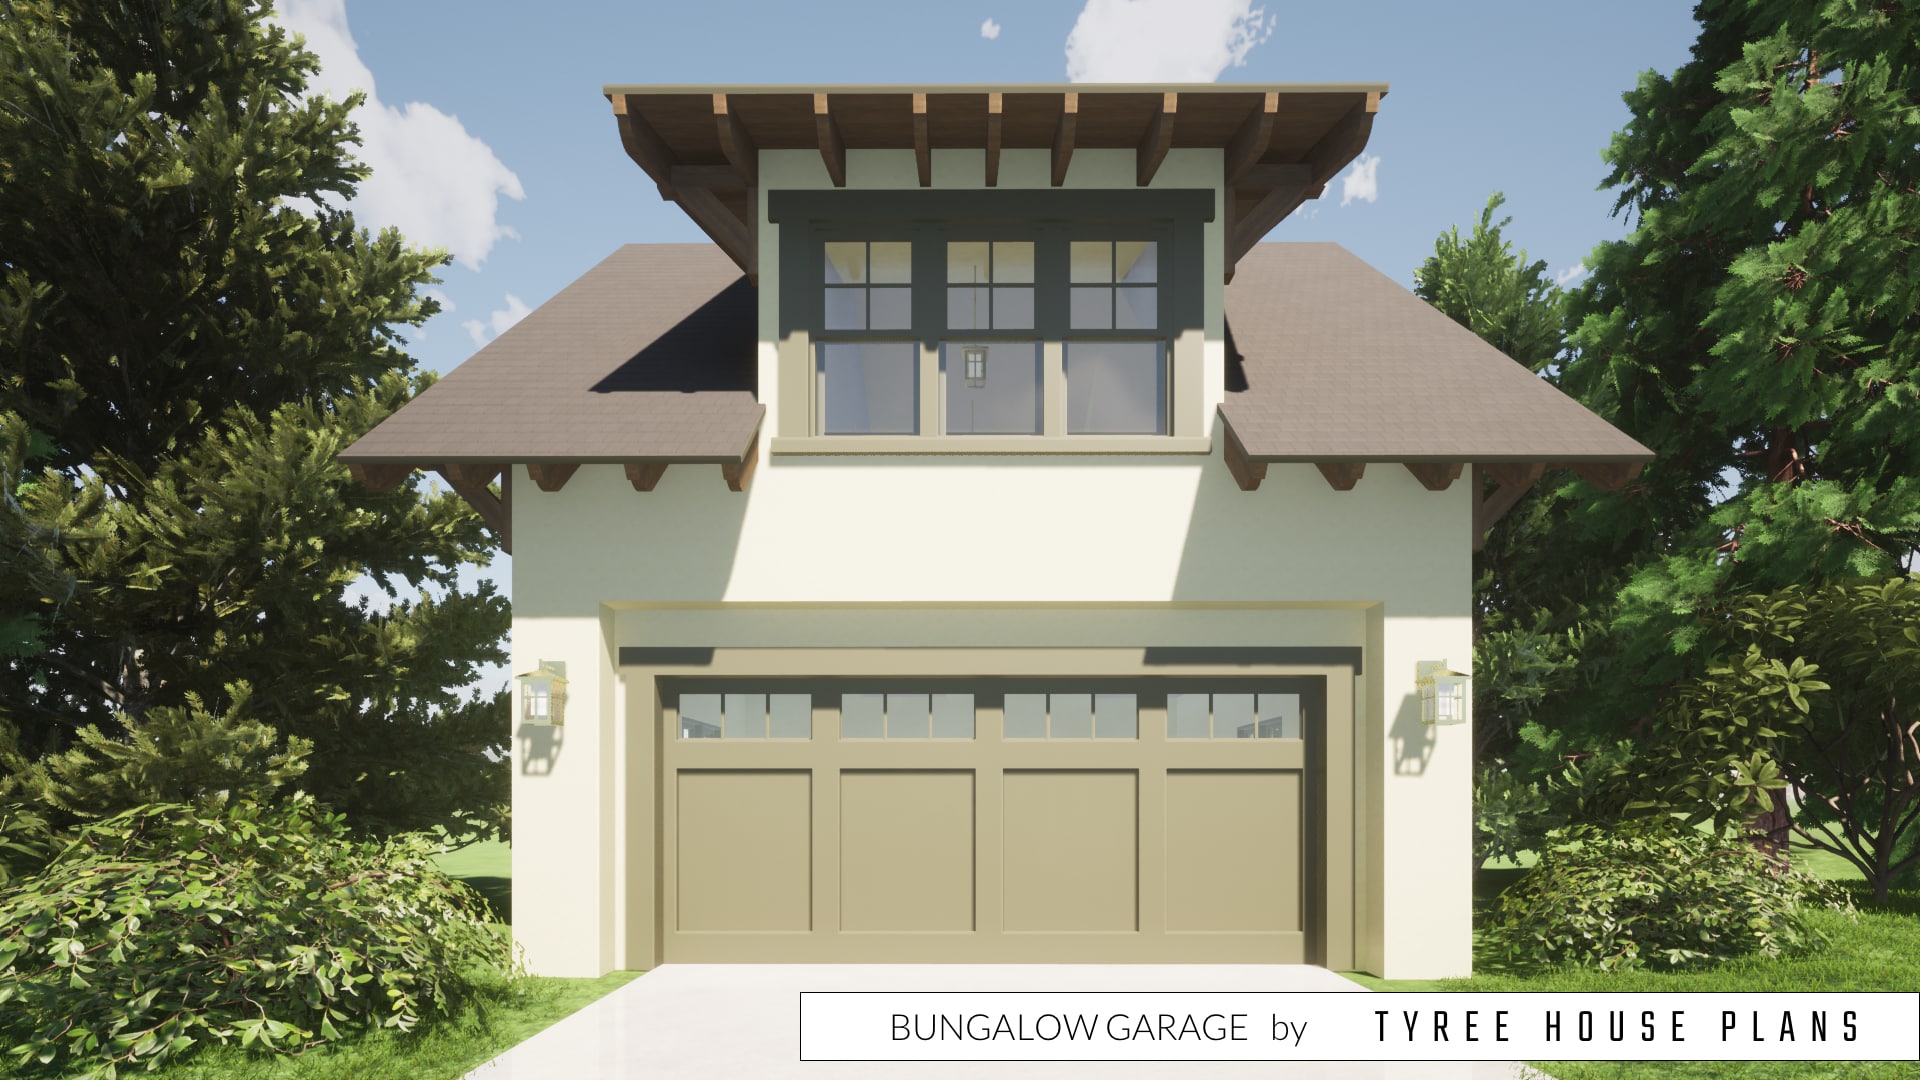 Bungalow Garage Plan by Tyree House Plans